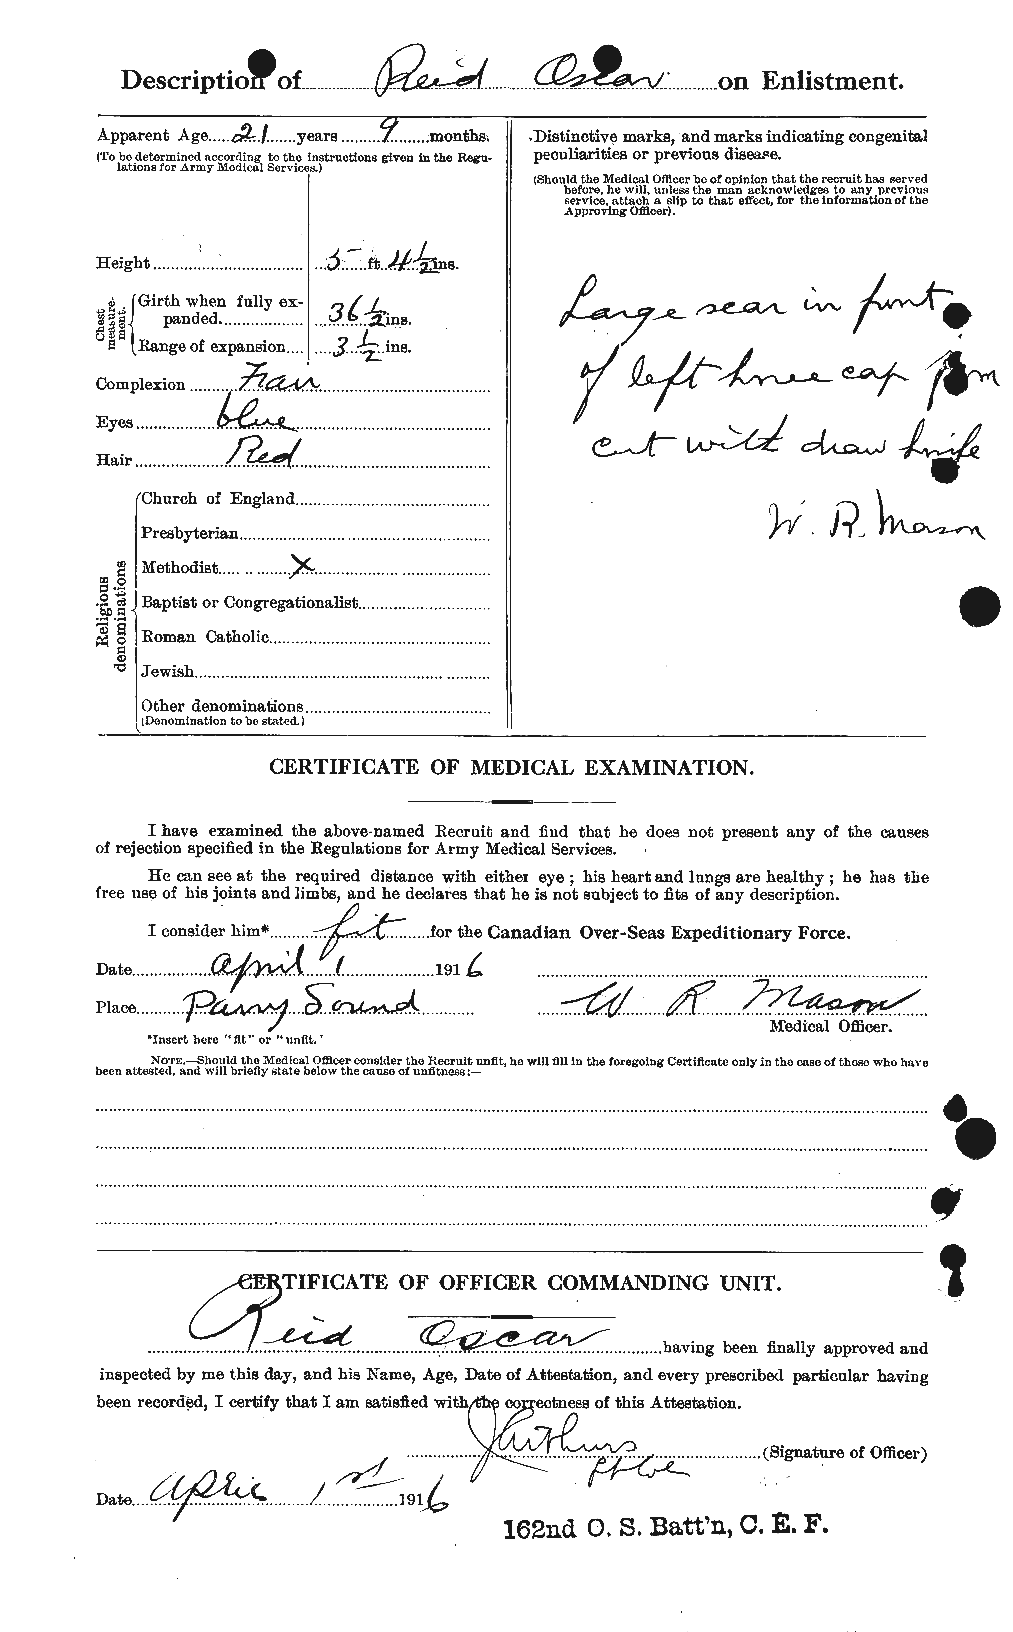 Personnel Records of the First World War - CEF 601821b